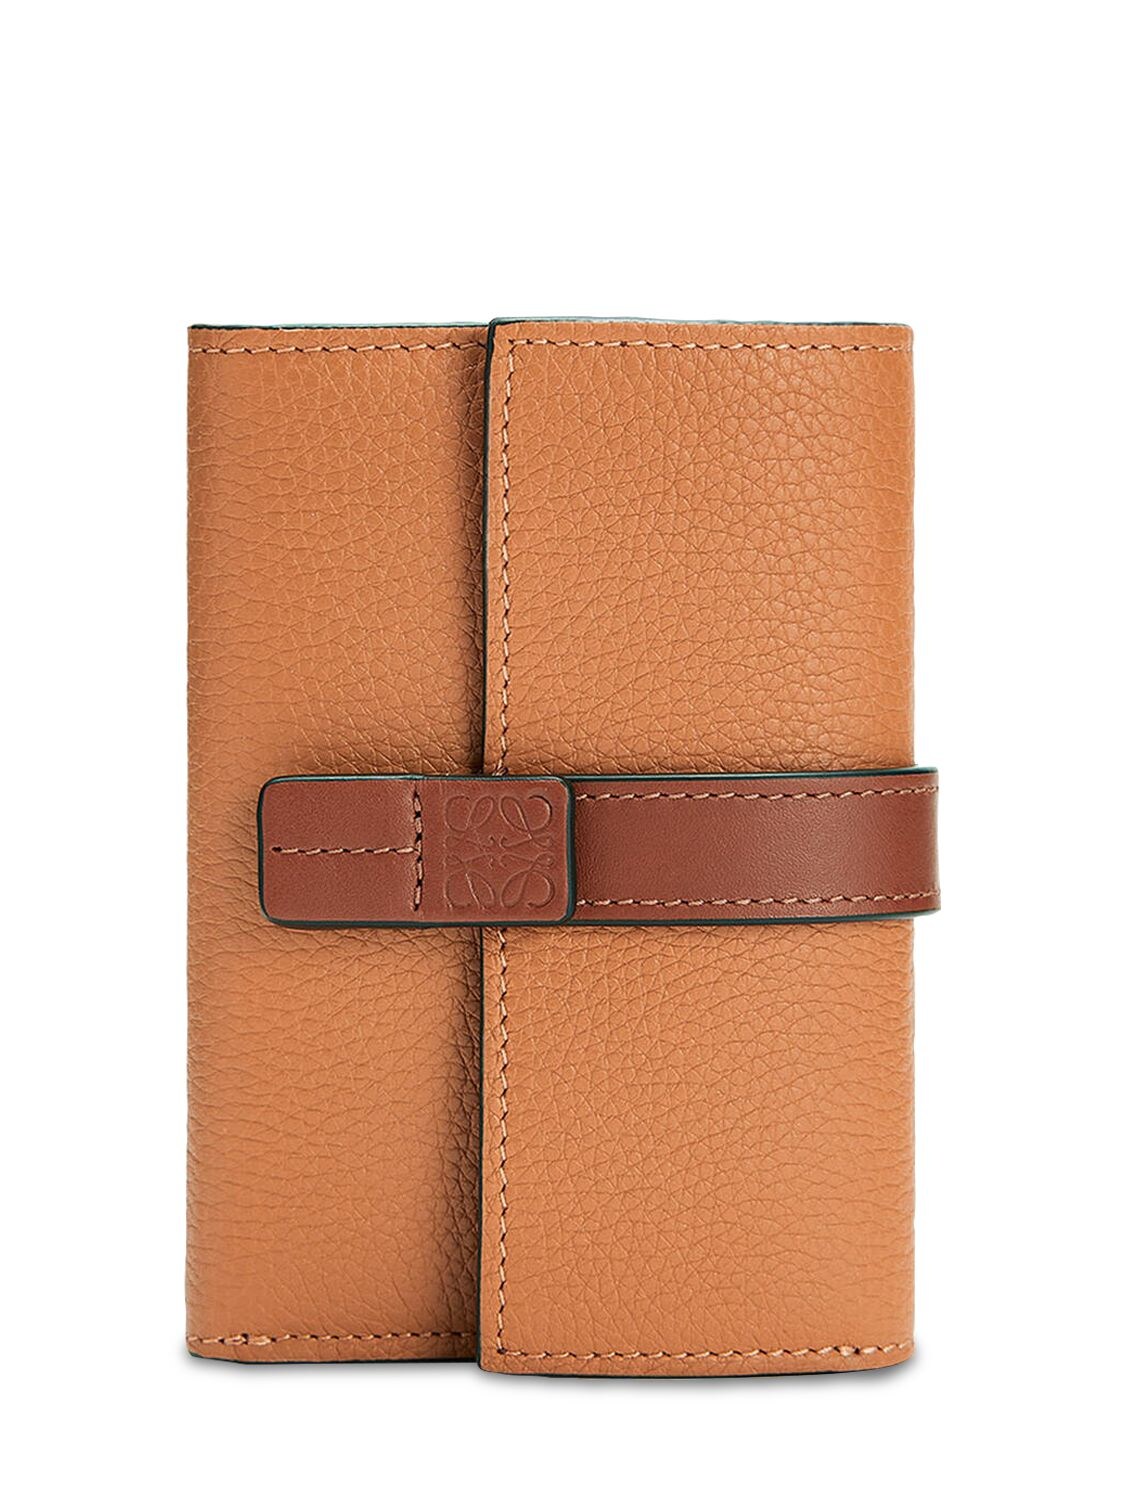 LOEWE SMALL VERTICAL LEATHER WALLET,74I3E8030-MZYZOQ2